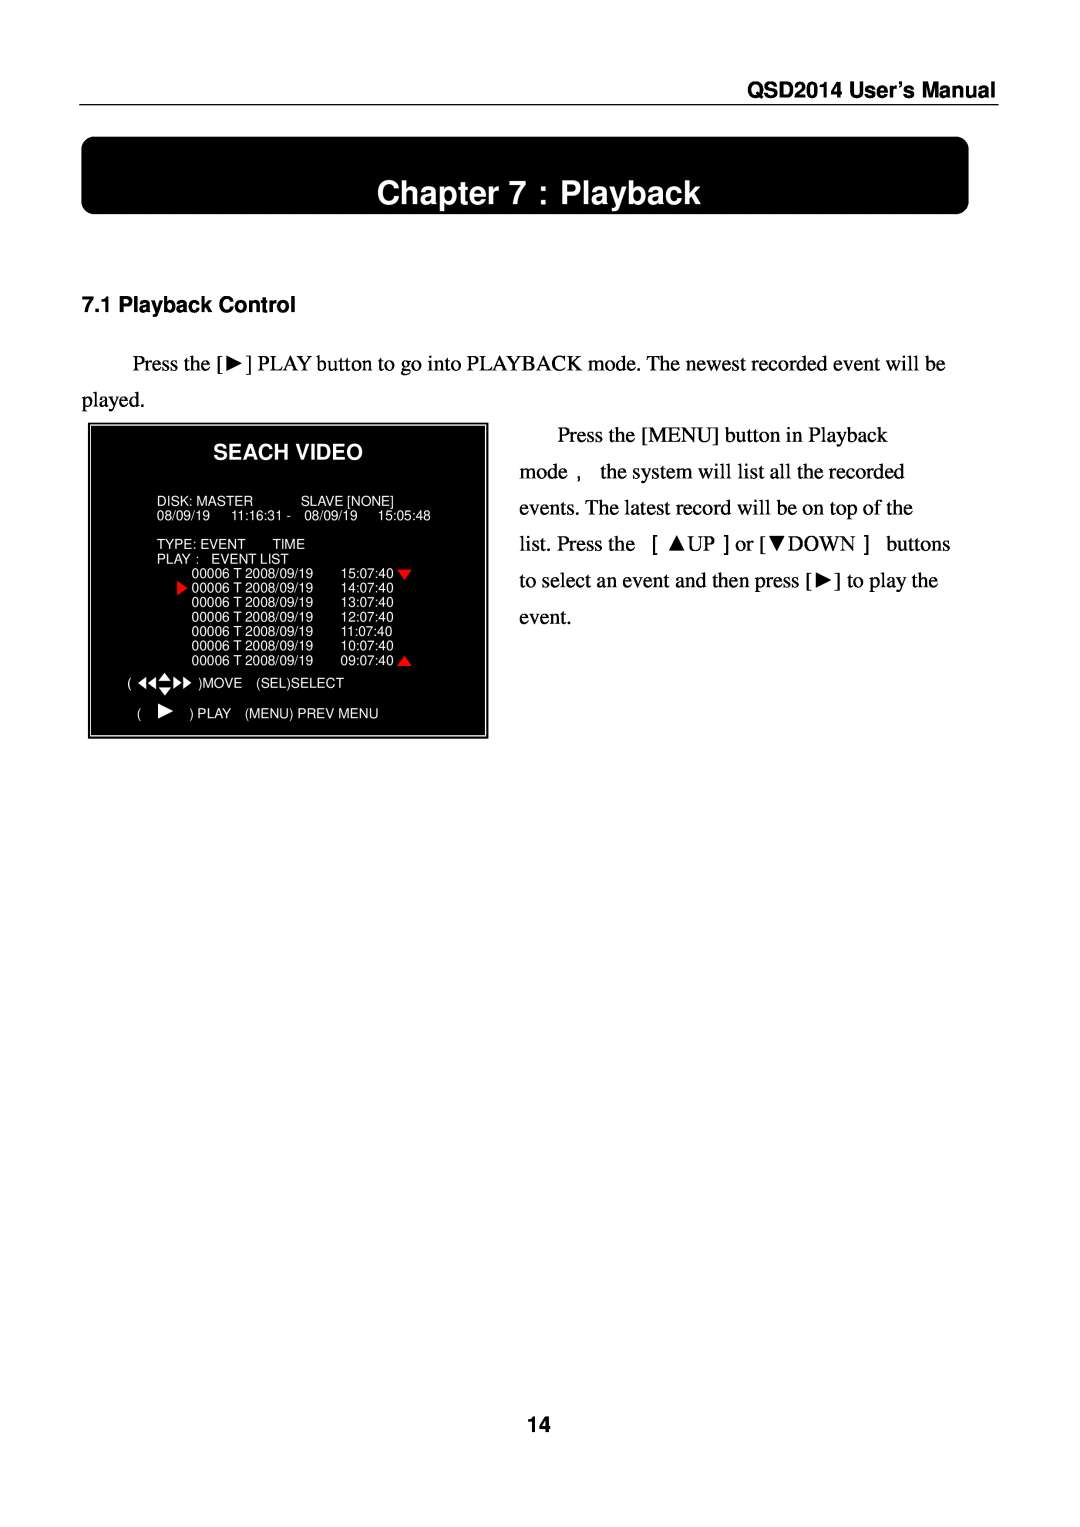 Q-See user manual ：Playback, Playback Control, Seach Video, QSD2014 User’s Manual 